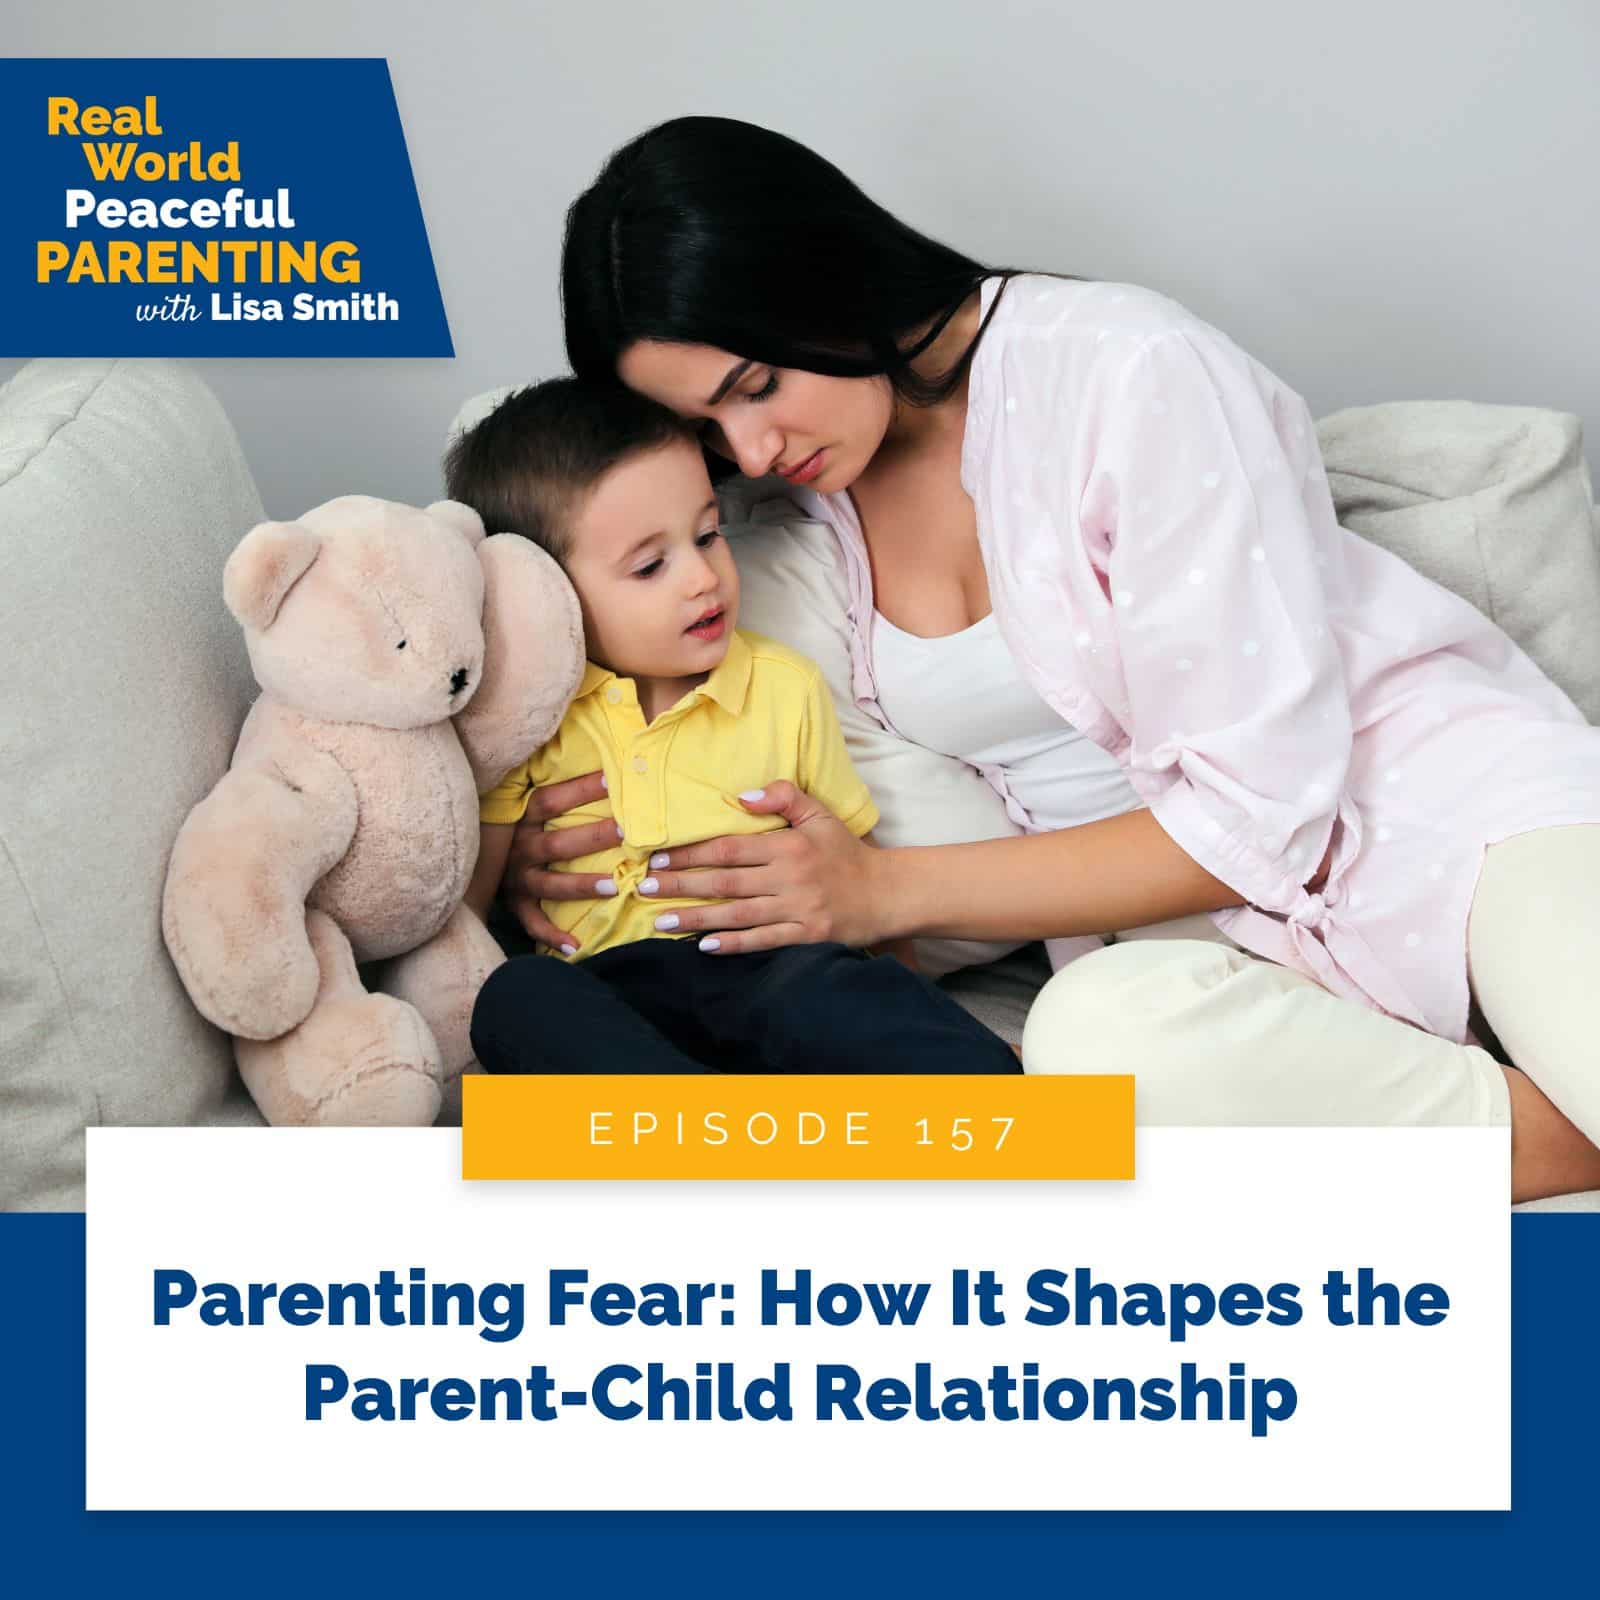 Real World Peaceful Parenting with Lisa Smith | Parenting Fear: How It Shapes the Parent-Child Relationship